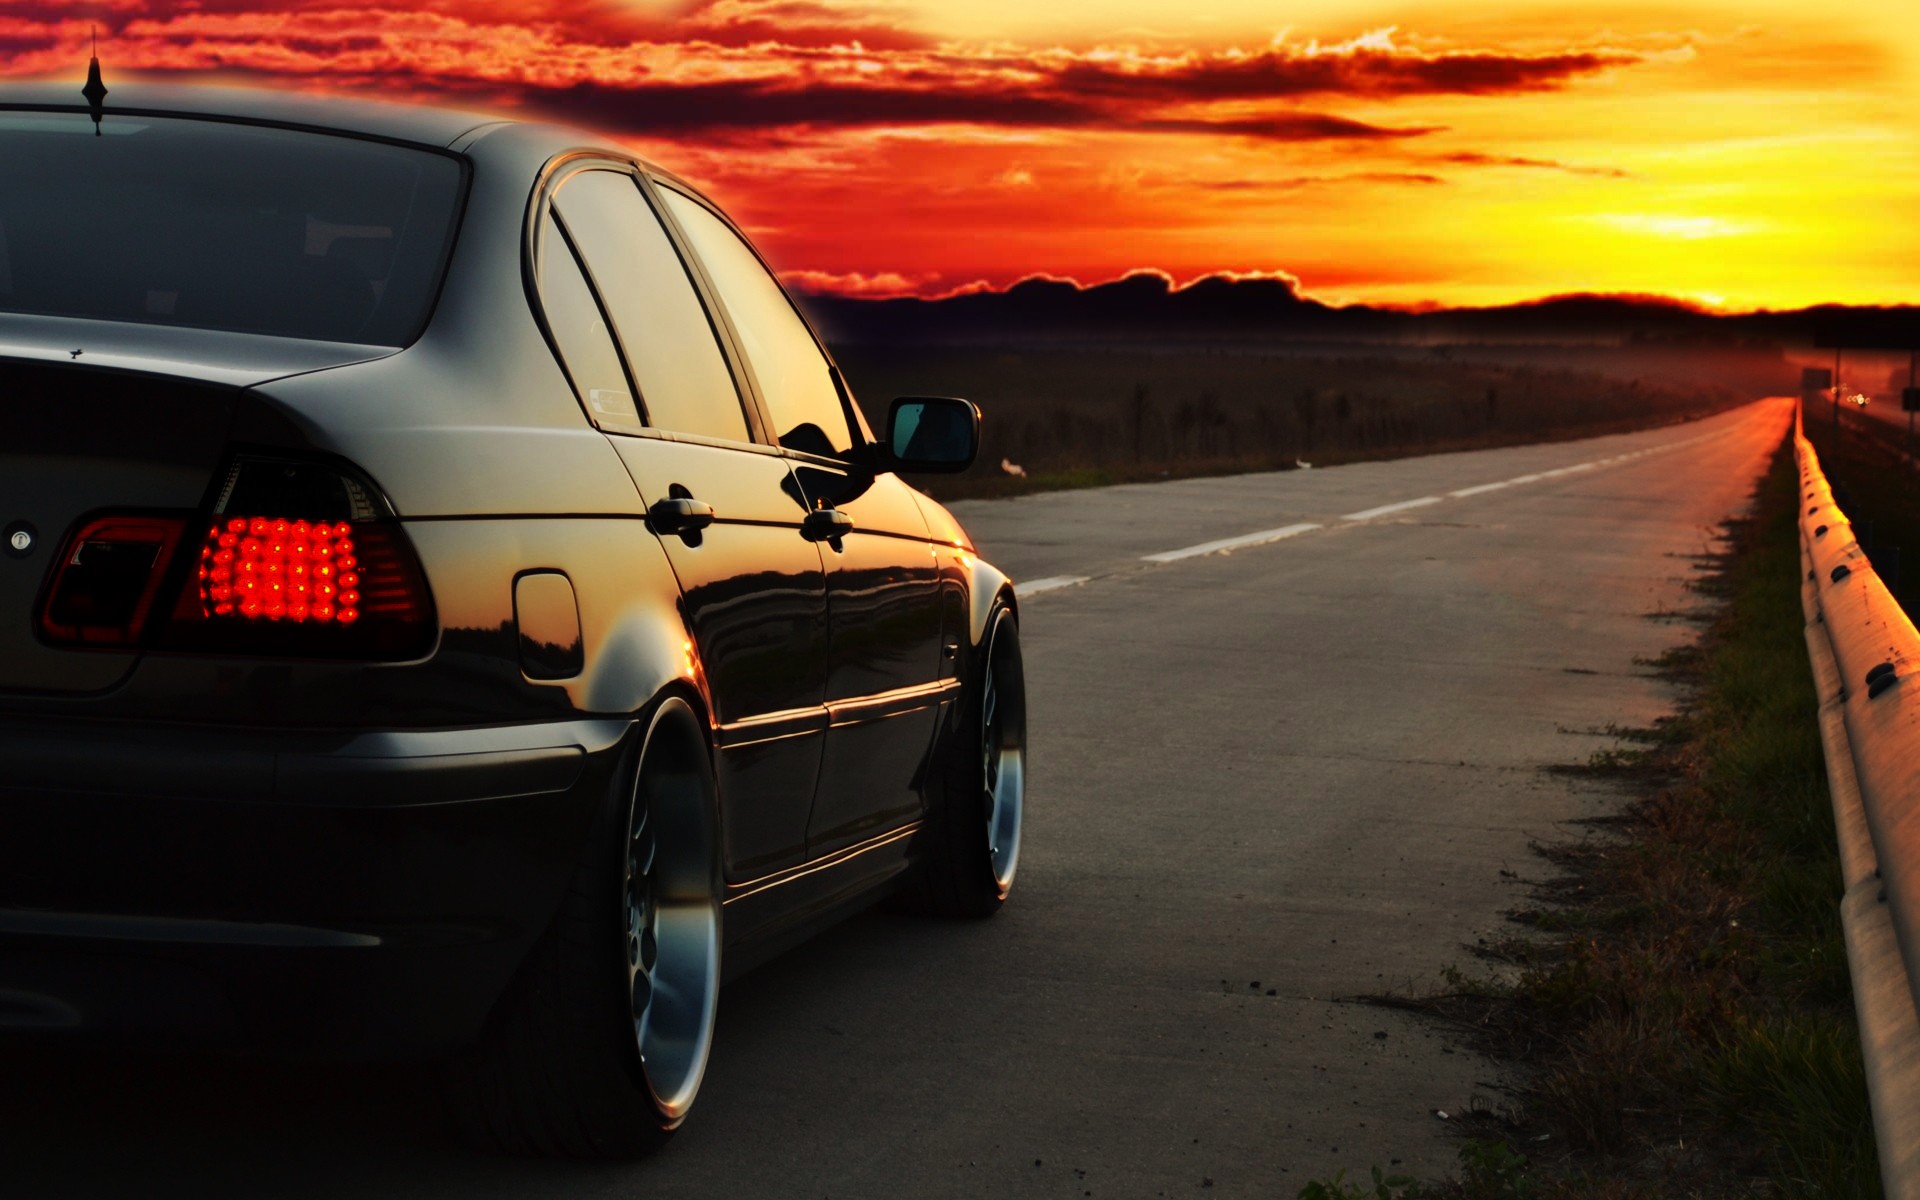 BMW E46, Photoshopped, Sunset, Road, Driving, Car Wallpapers HD